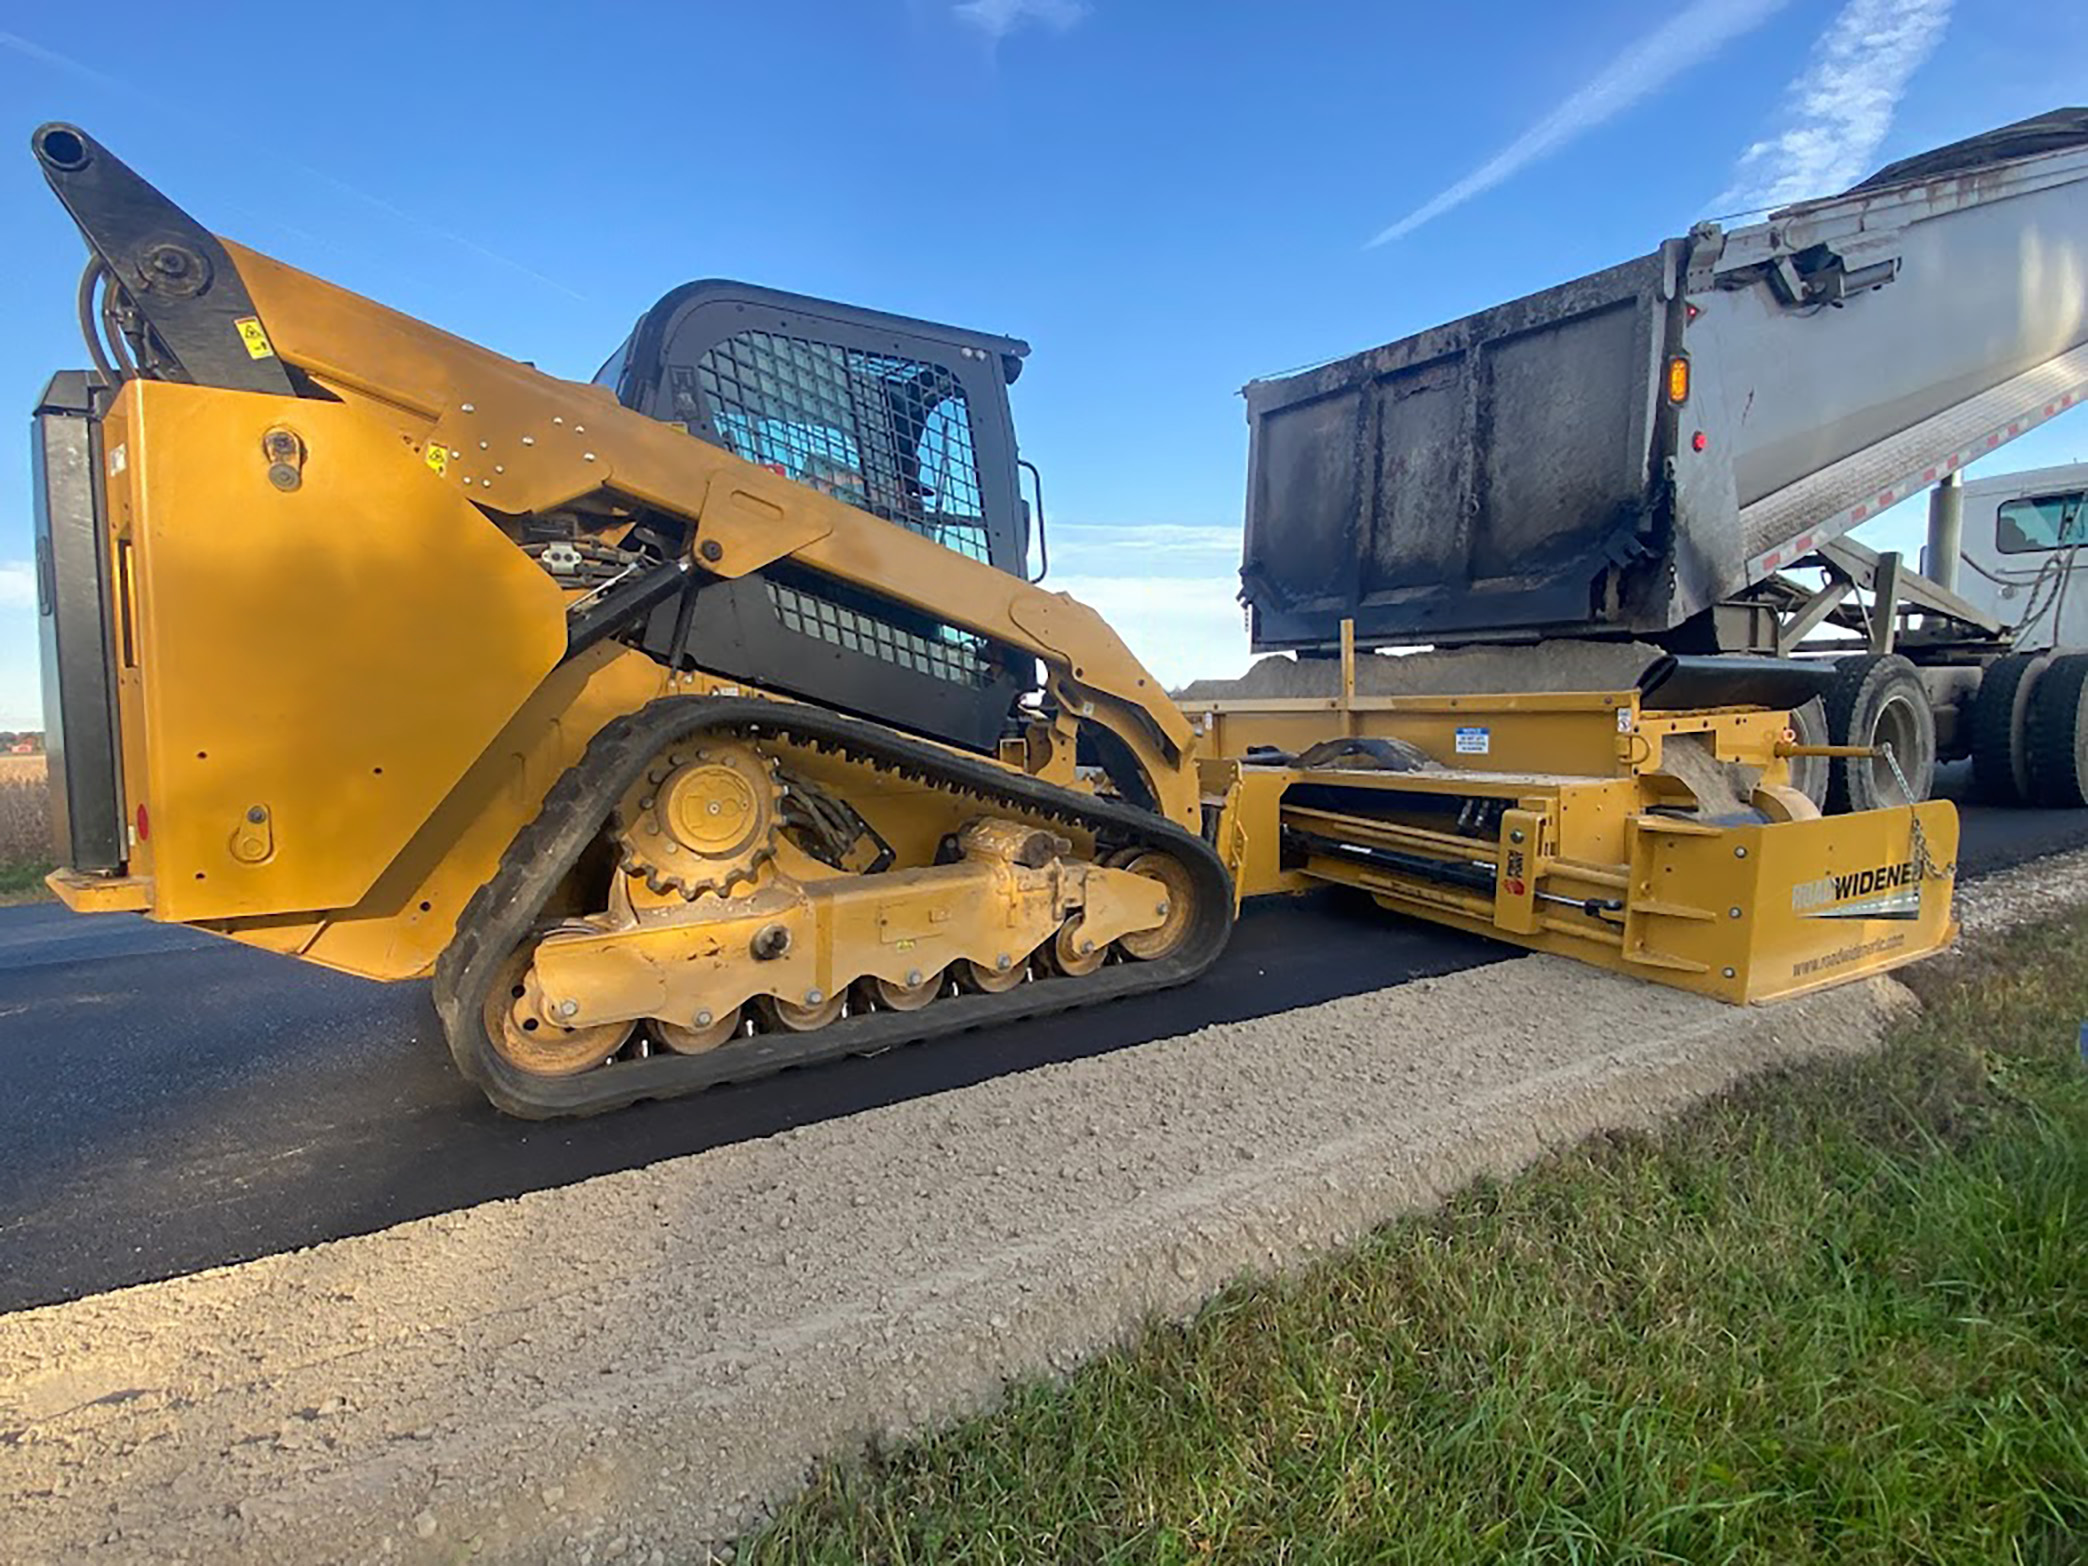 Case Study: Muscatine County Highway Department